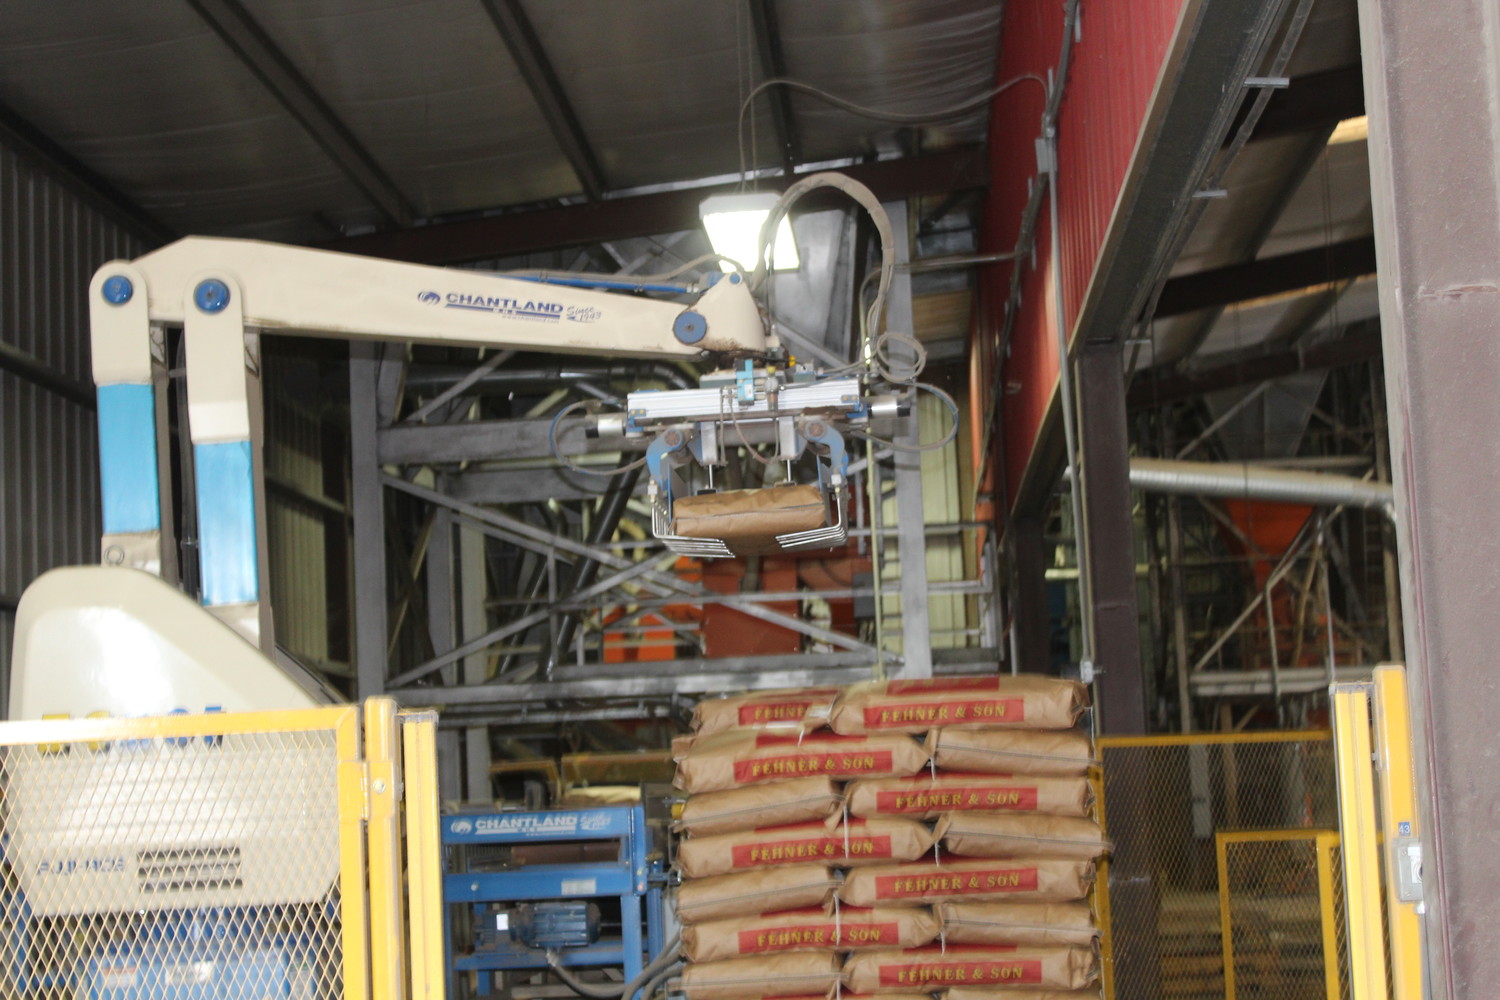 In 2007, this robot started the automation process at Fehner. The robot stacks feed bags, and then 8 different fork trucks load the pallets and store them around the property